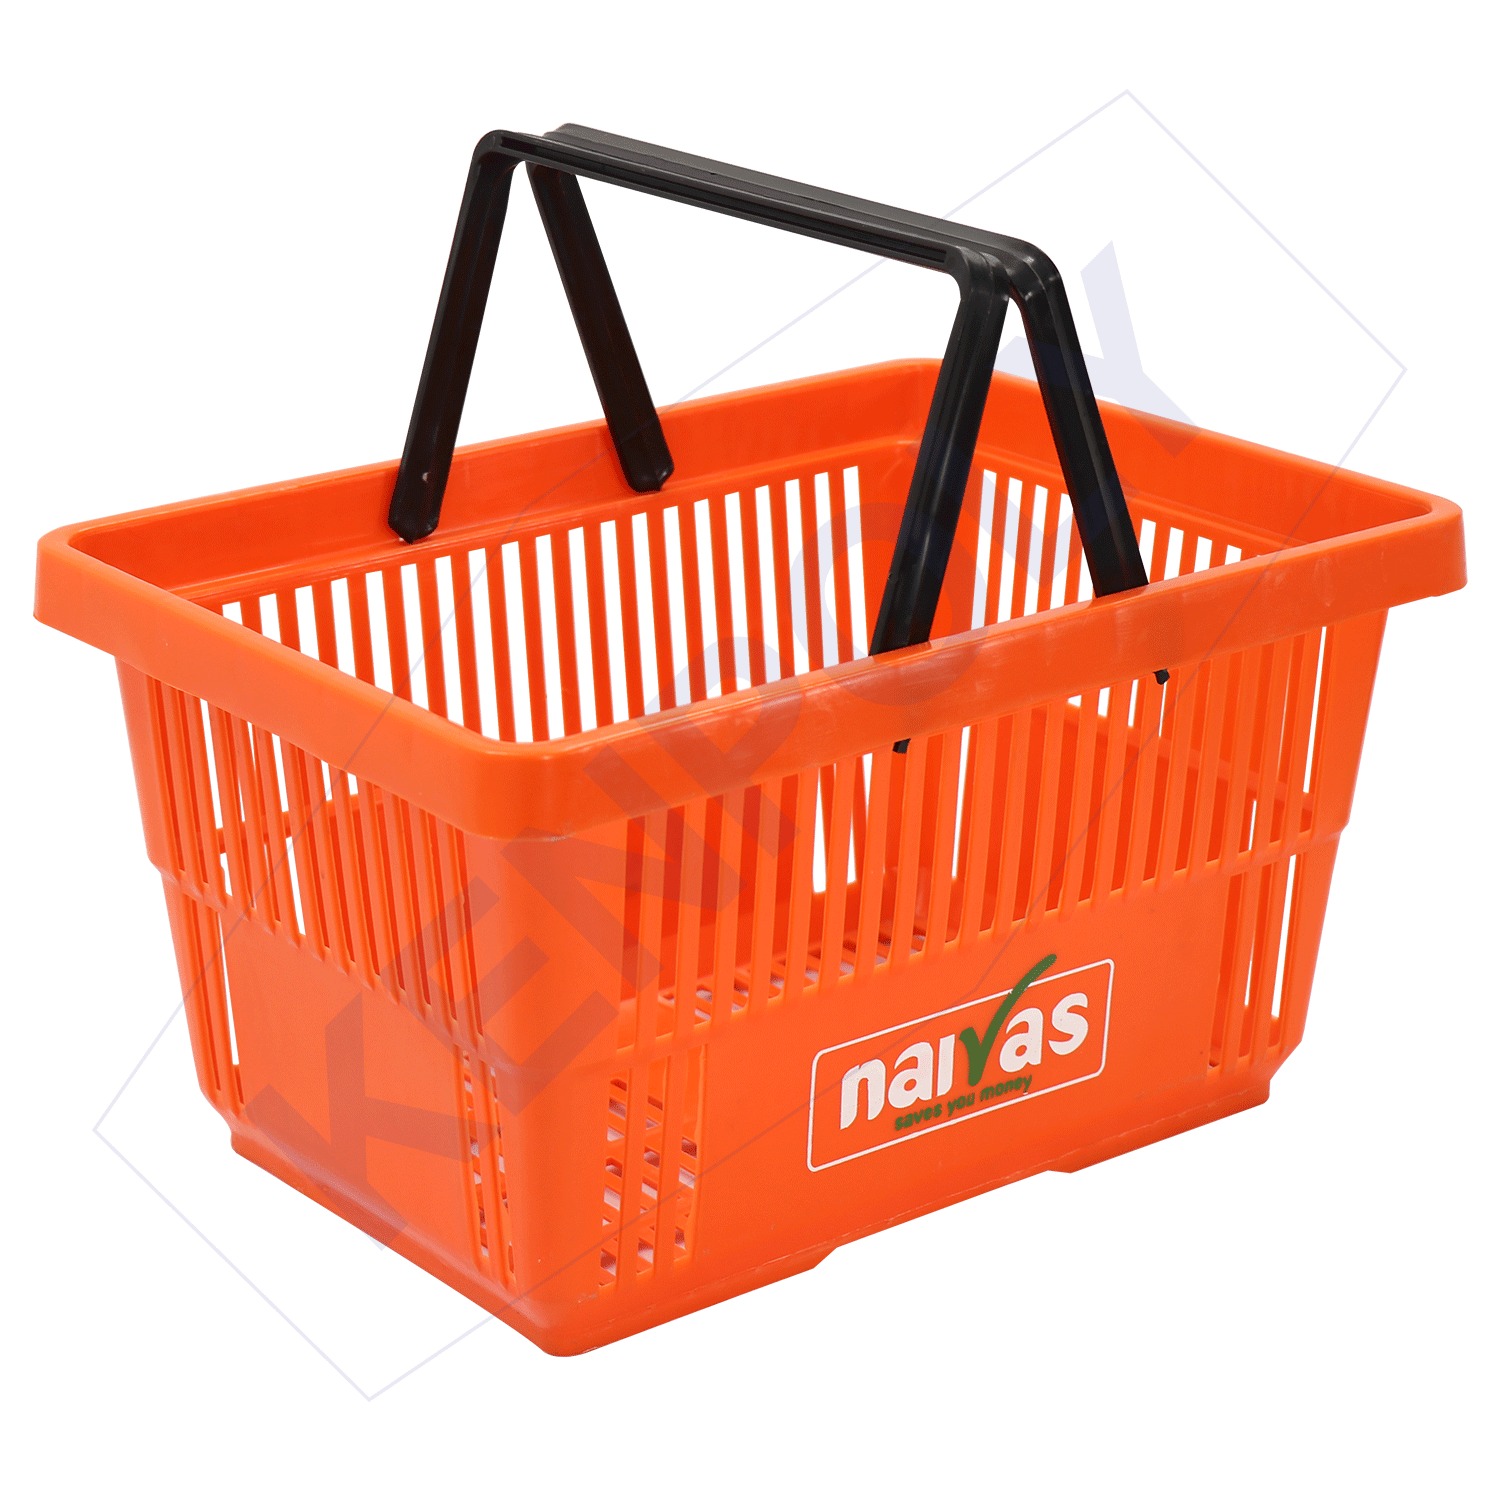 Baskets | Kenpoly Manufacturers Limited1500 x 1500